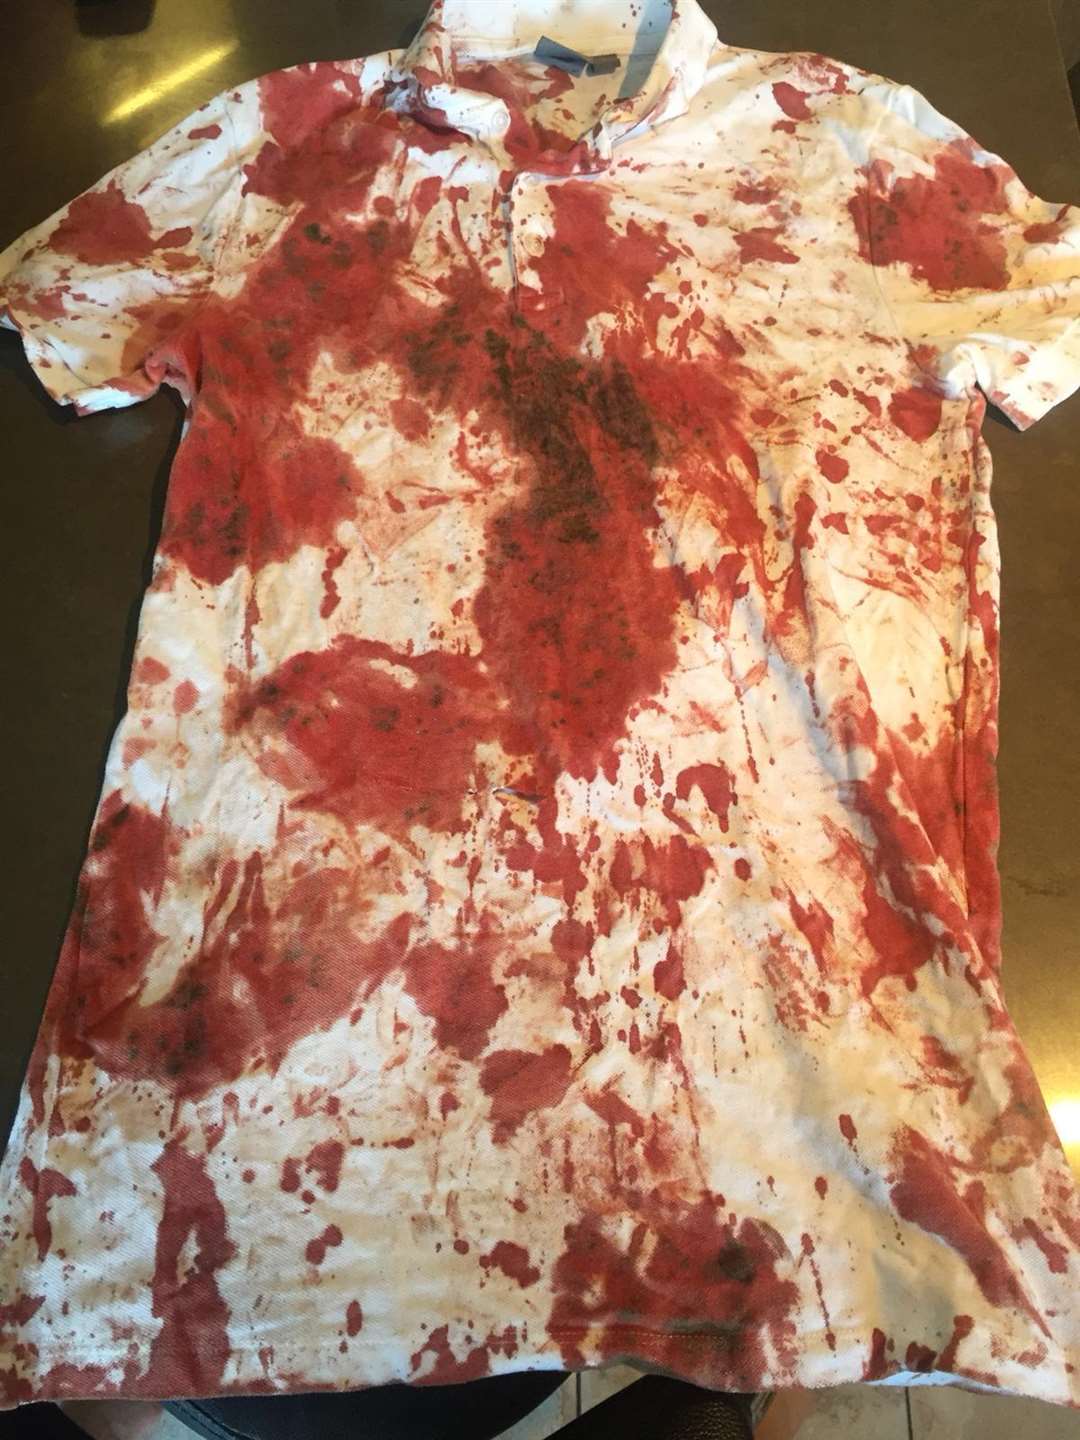 The teenagers blood-stained shirt